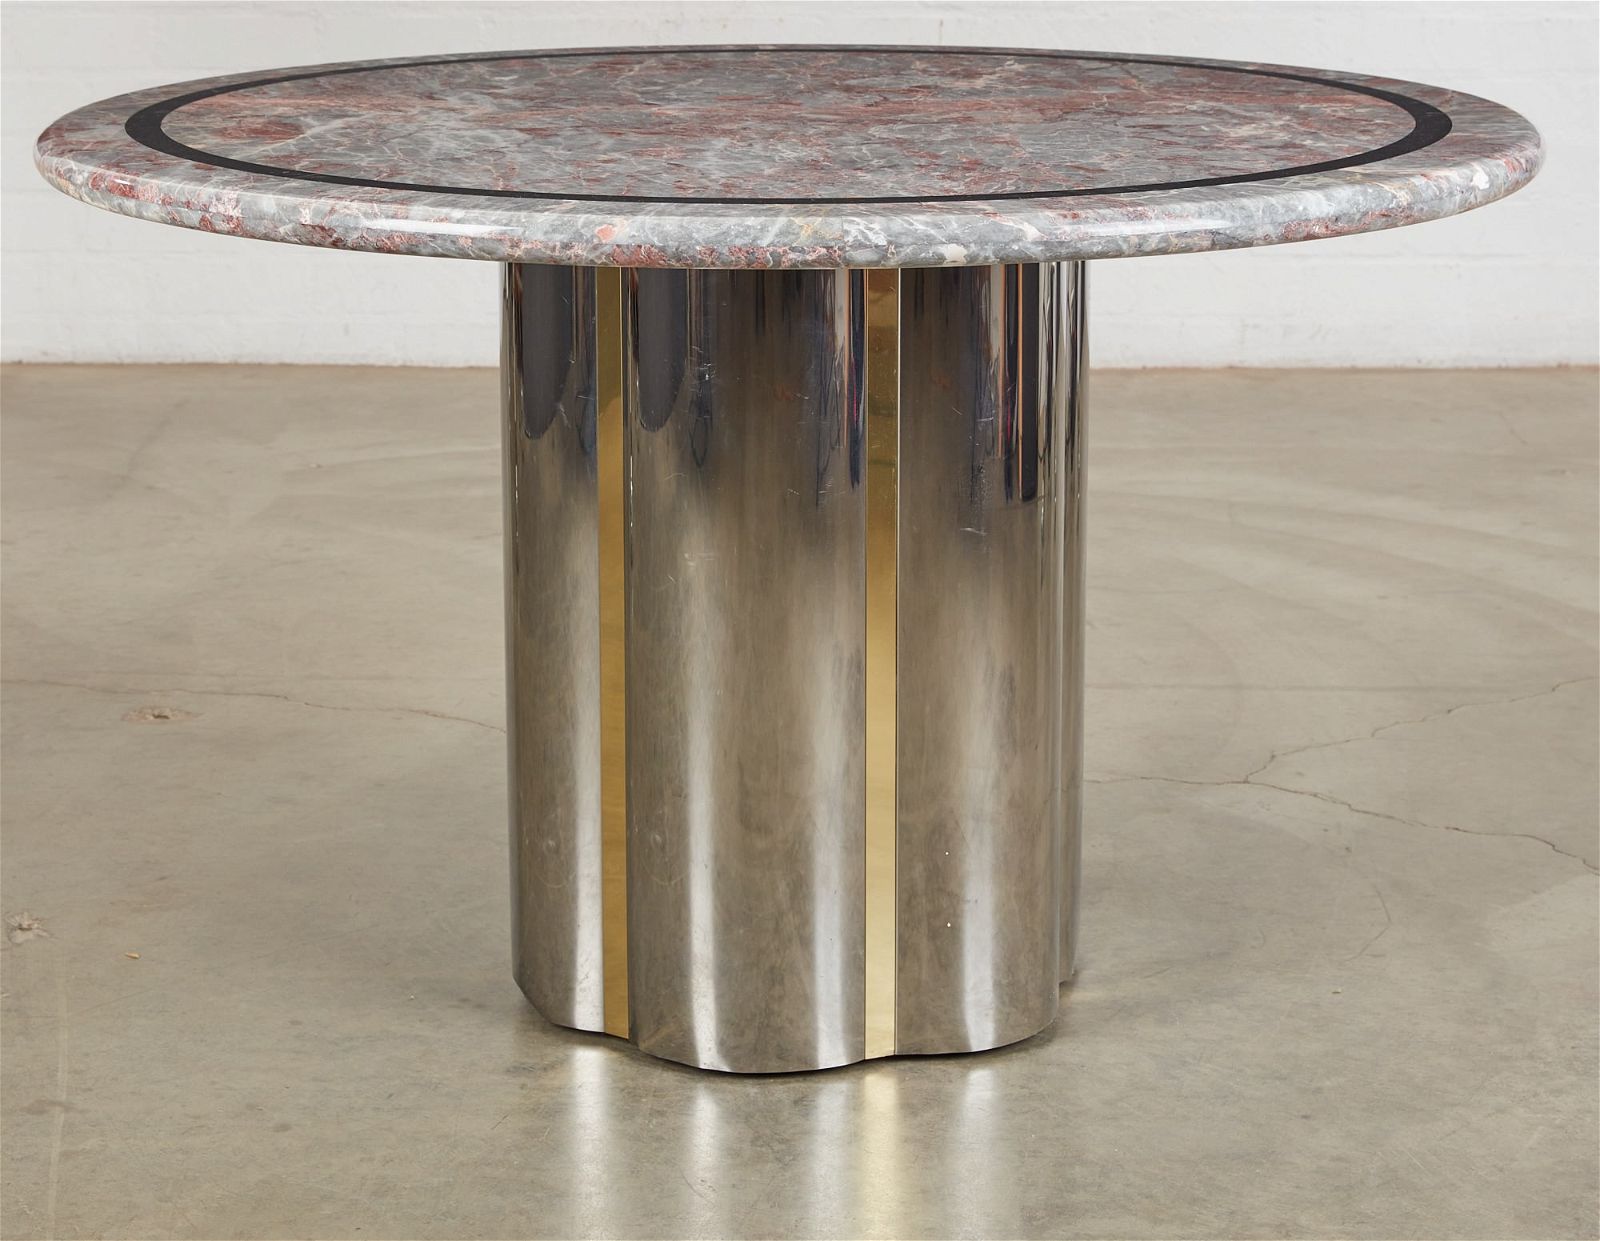 A CHROME, BRASS, AND MARBLE PEDESTAL